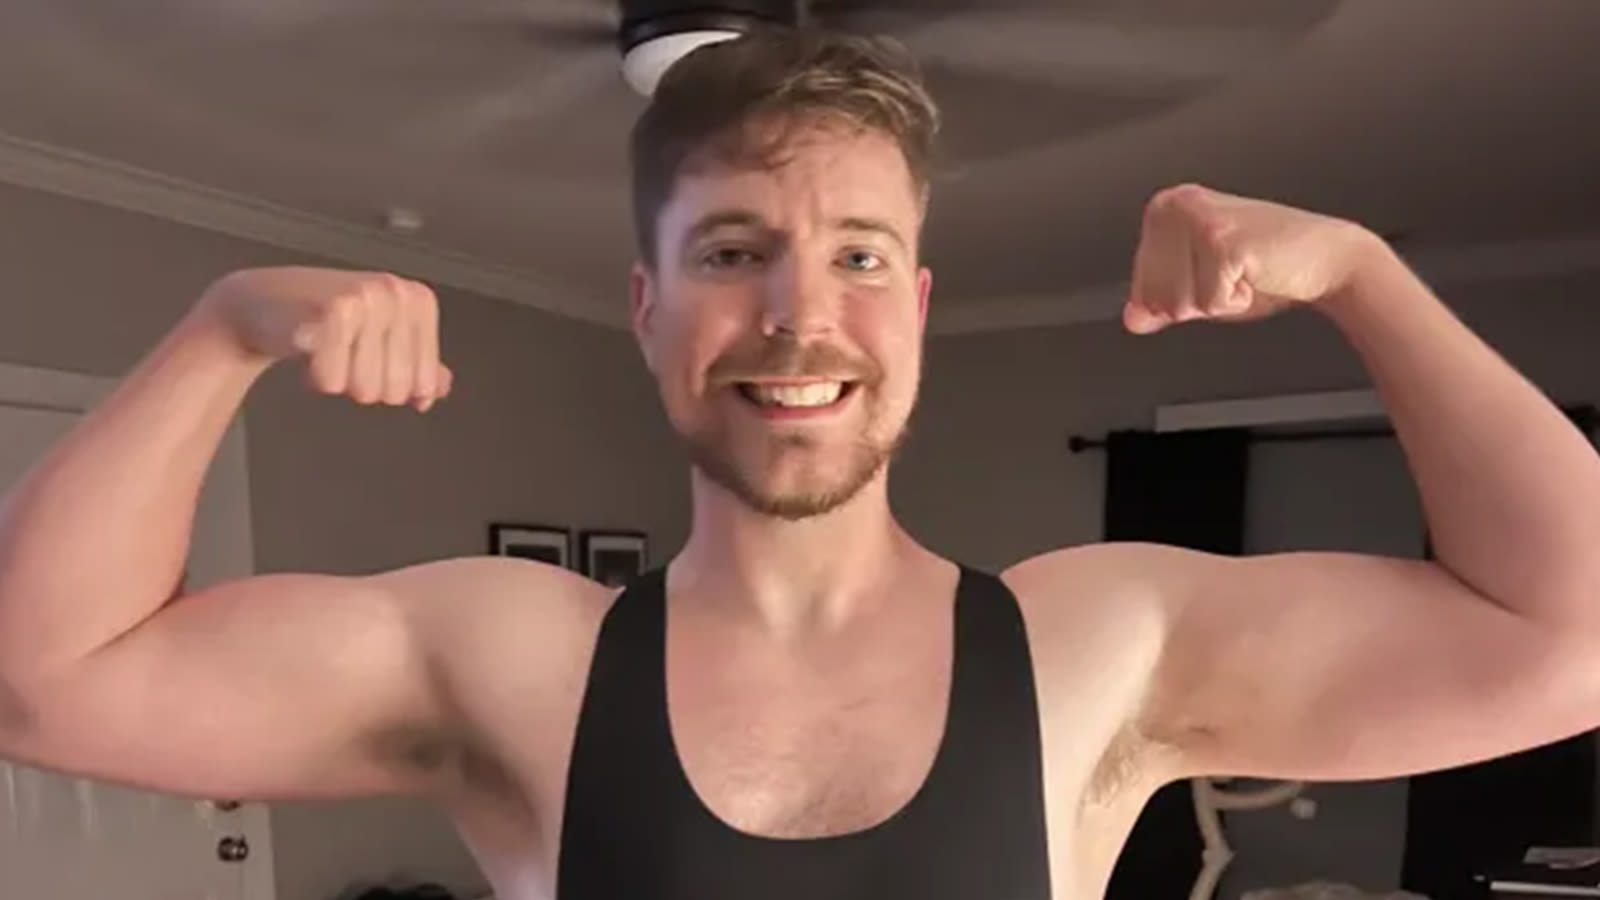 MrBeast challenges T-Series CEO to boxing match as YouTube subscriber race heats up - Dexerto